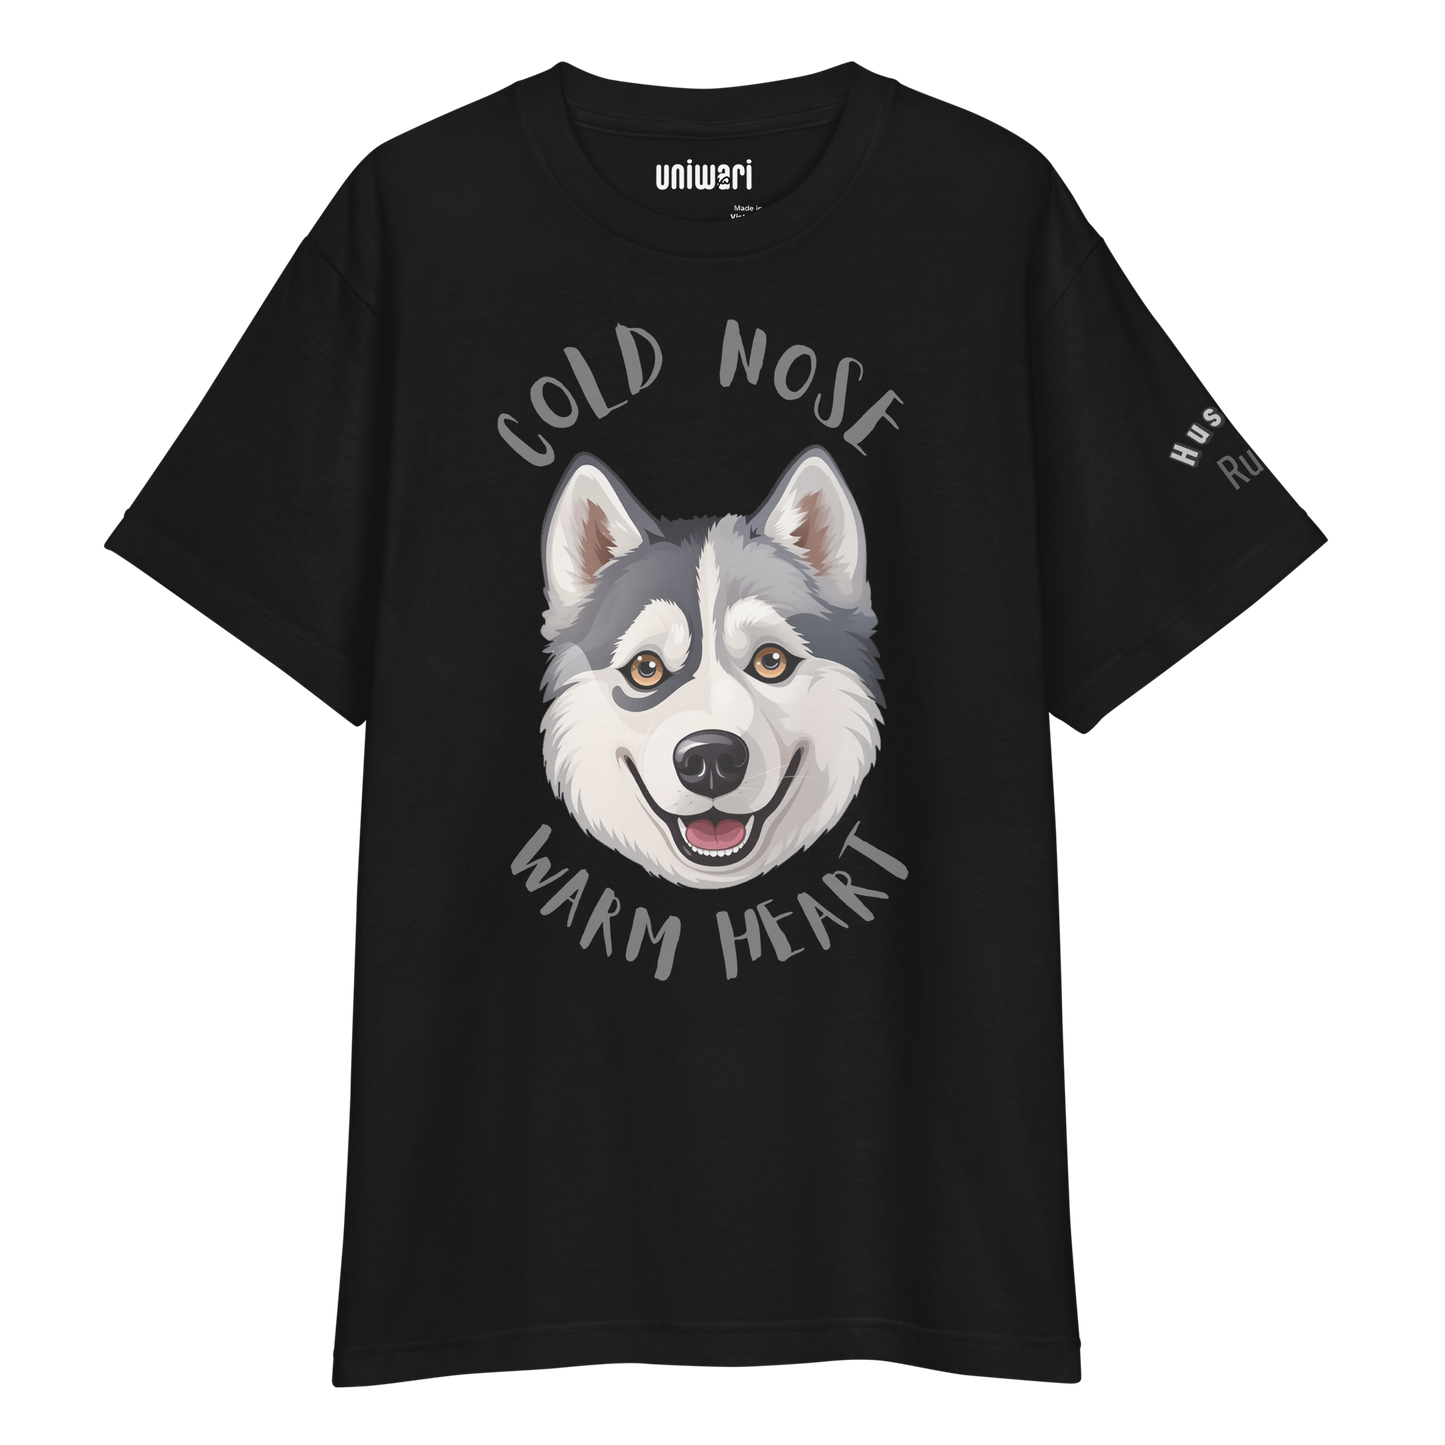 Black High Quality Tee - Front Design with a stamp of a Husky and the phrase "cold nose warm heart" - Left Shoulder with phrase "Husky Rules"